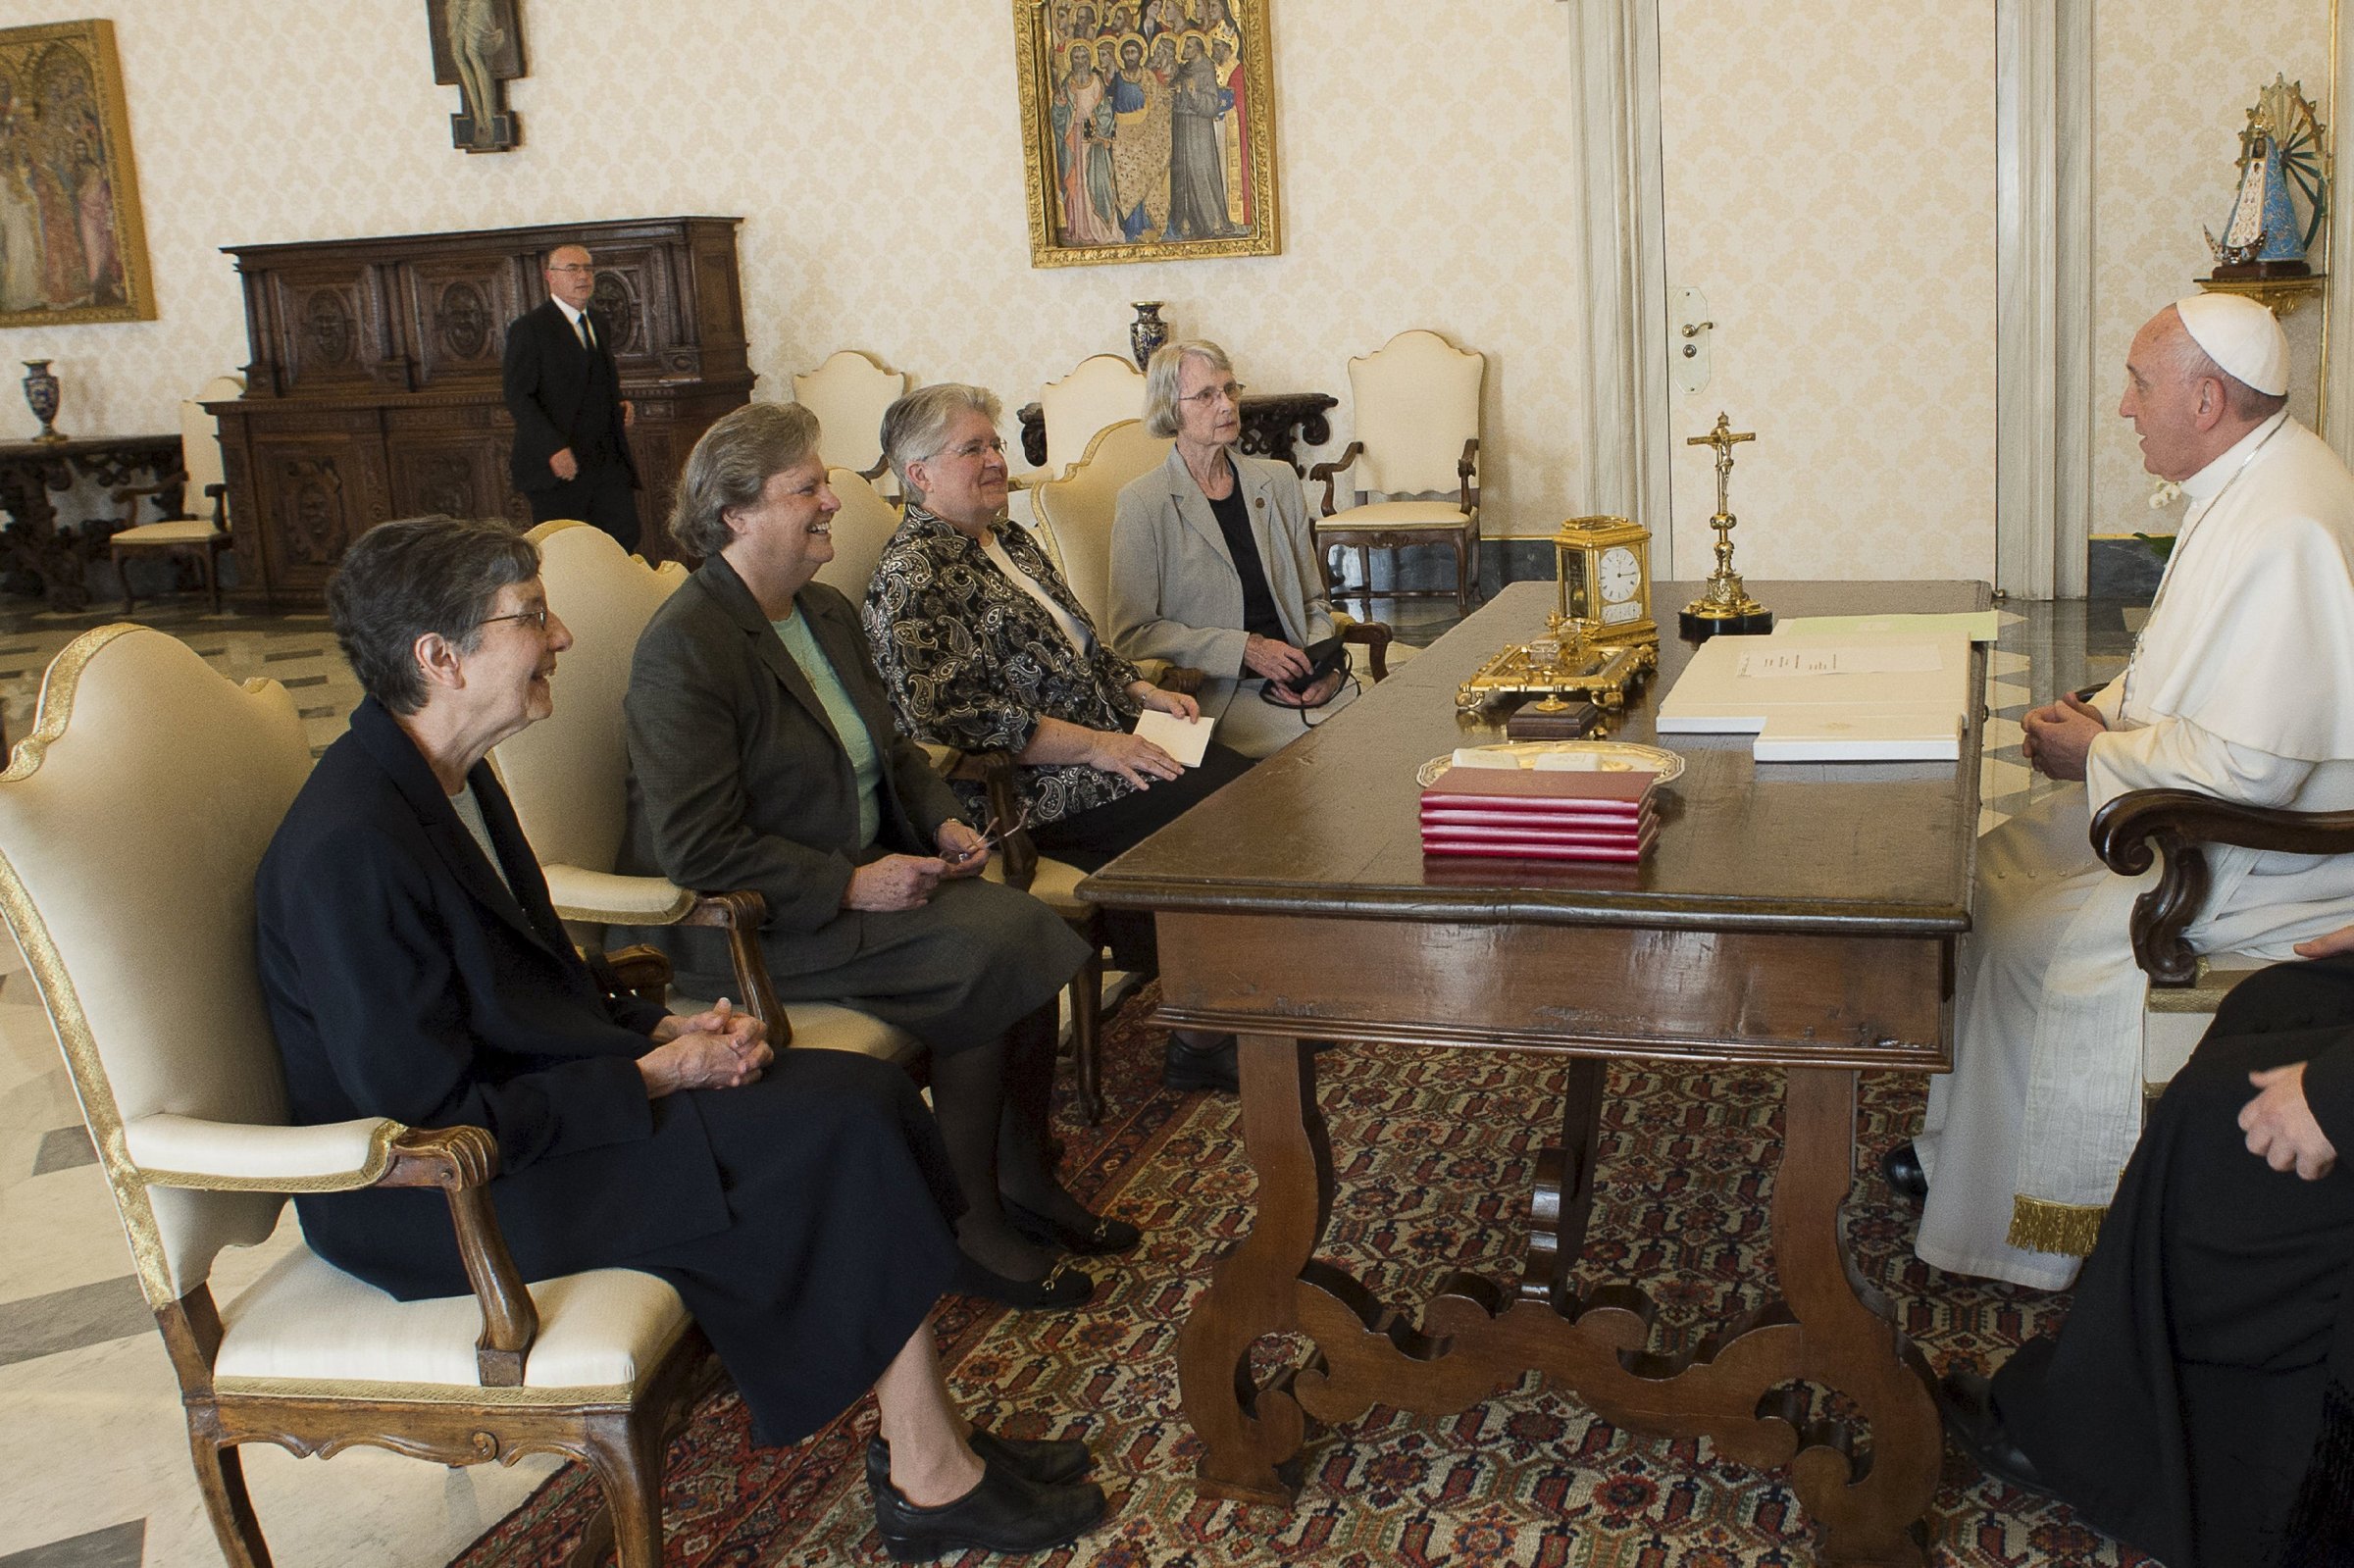 Pope Francis meets members of Leadership Conference of Women Religious (LCWR) during a private audience in the pontiff's studio at the Vatican on April 16, 2015.